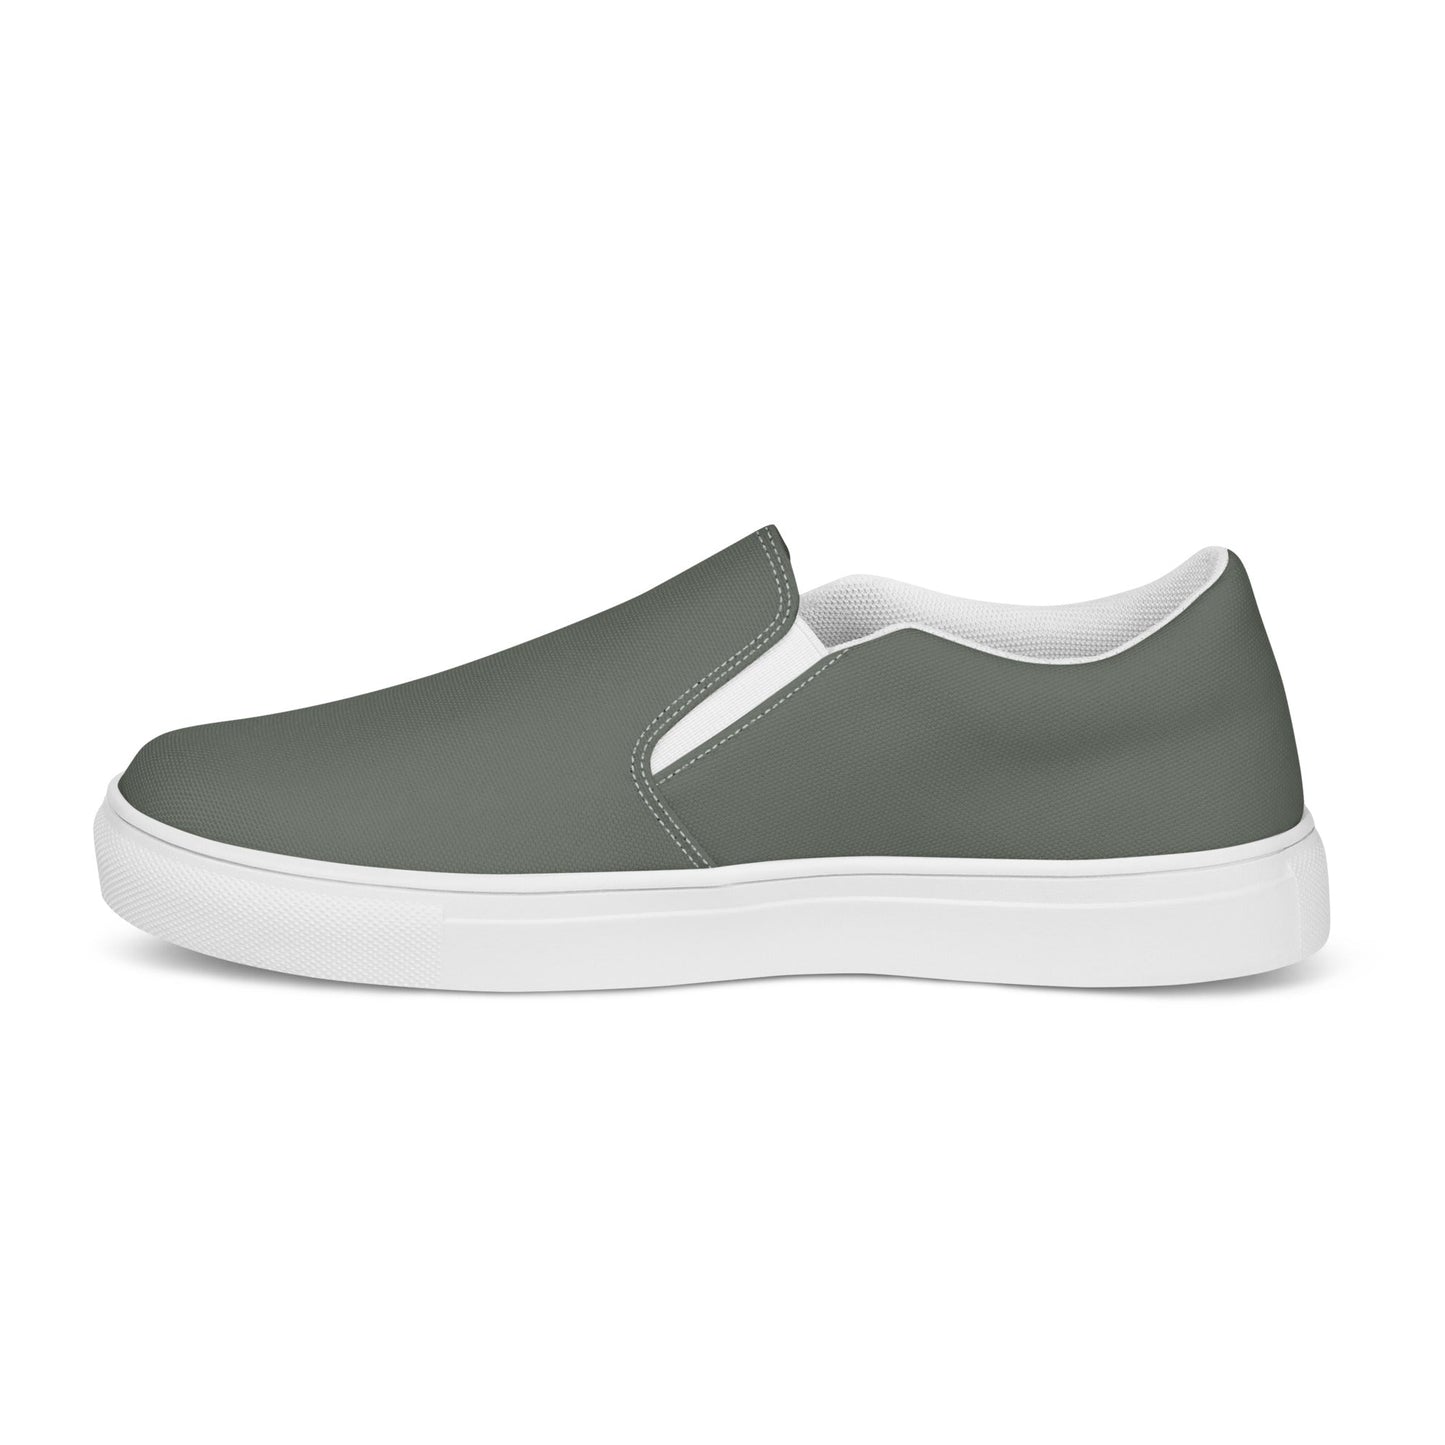 klasneakers Women’s slip-on canvas shoes - Olive Drab Gray